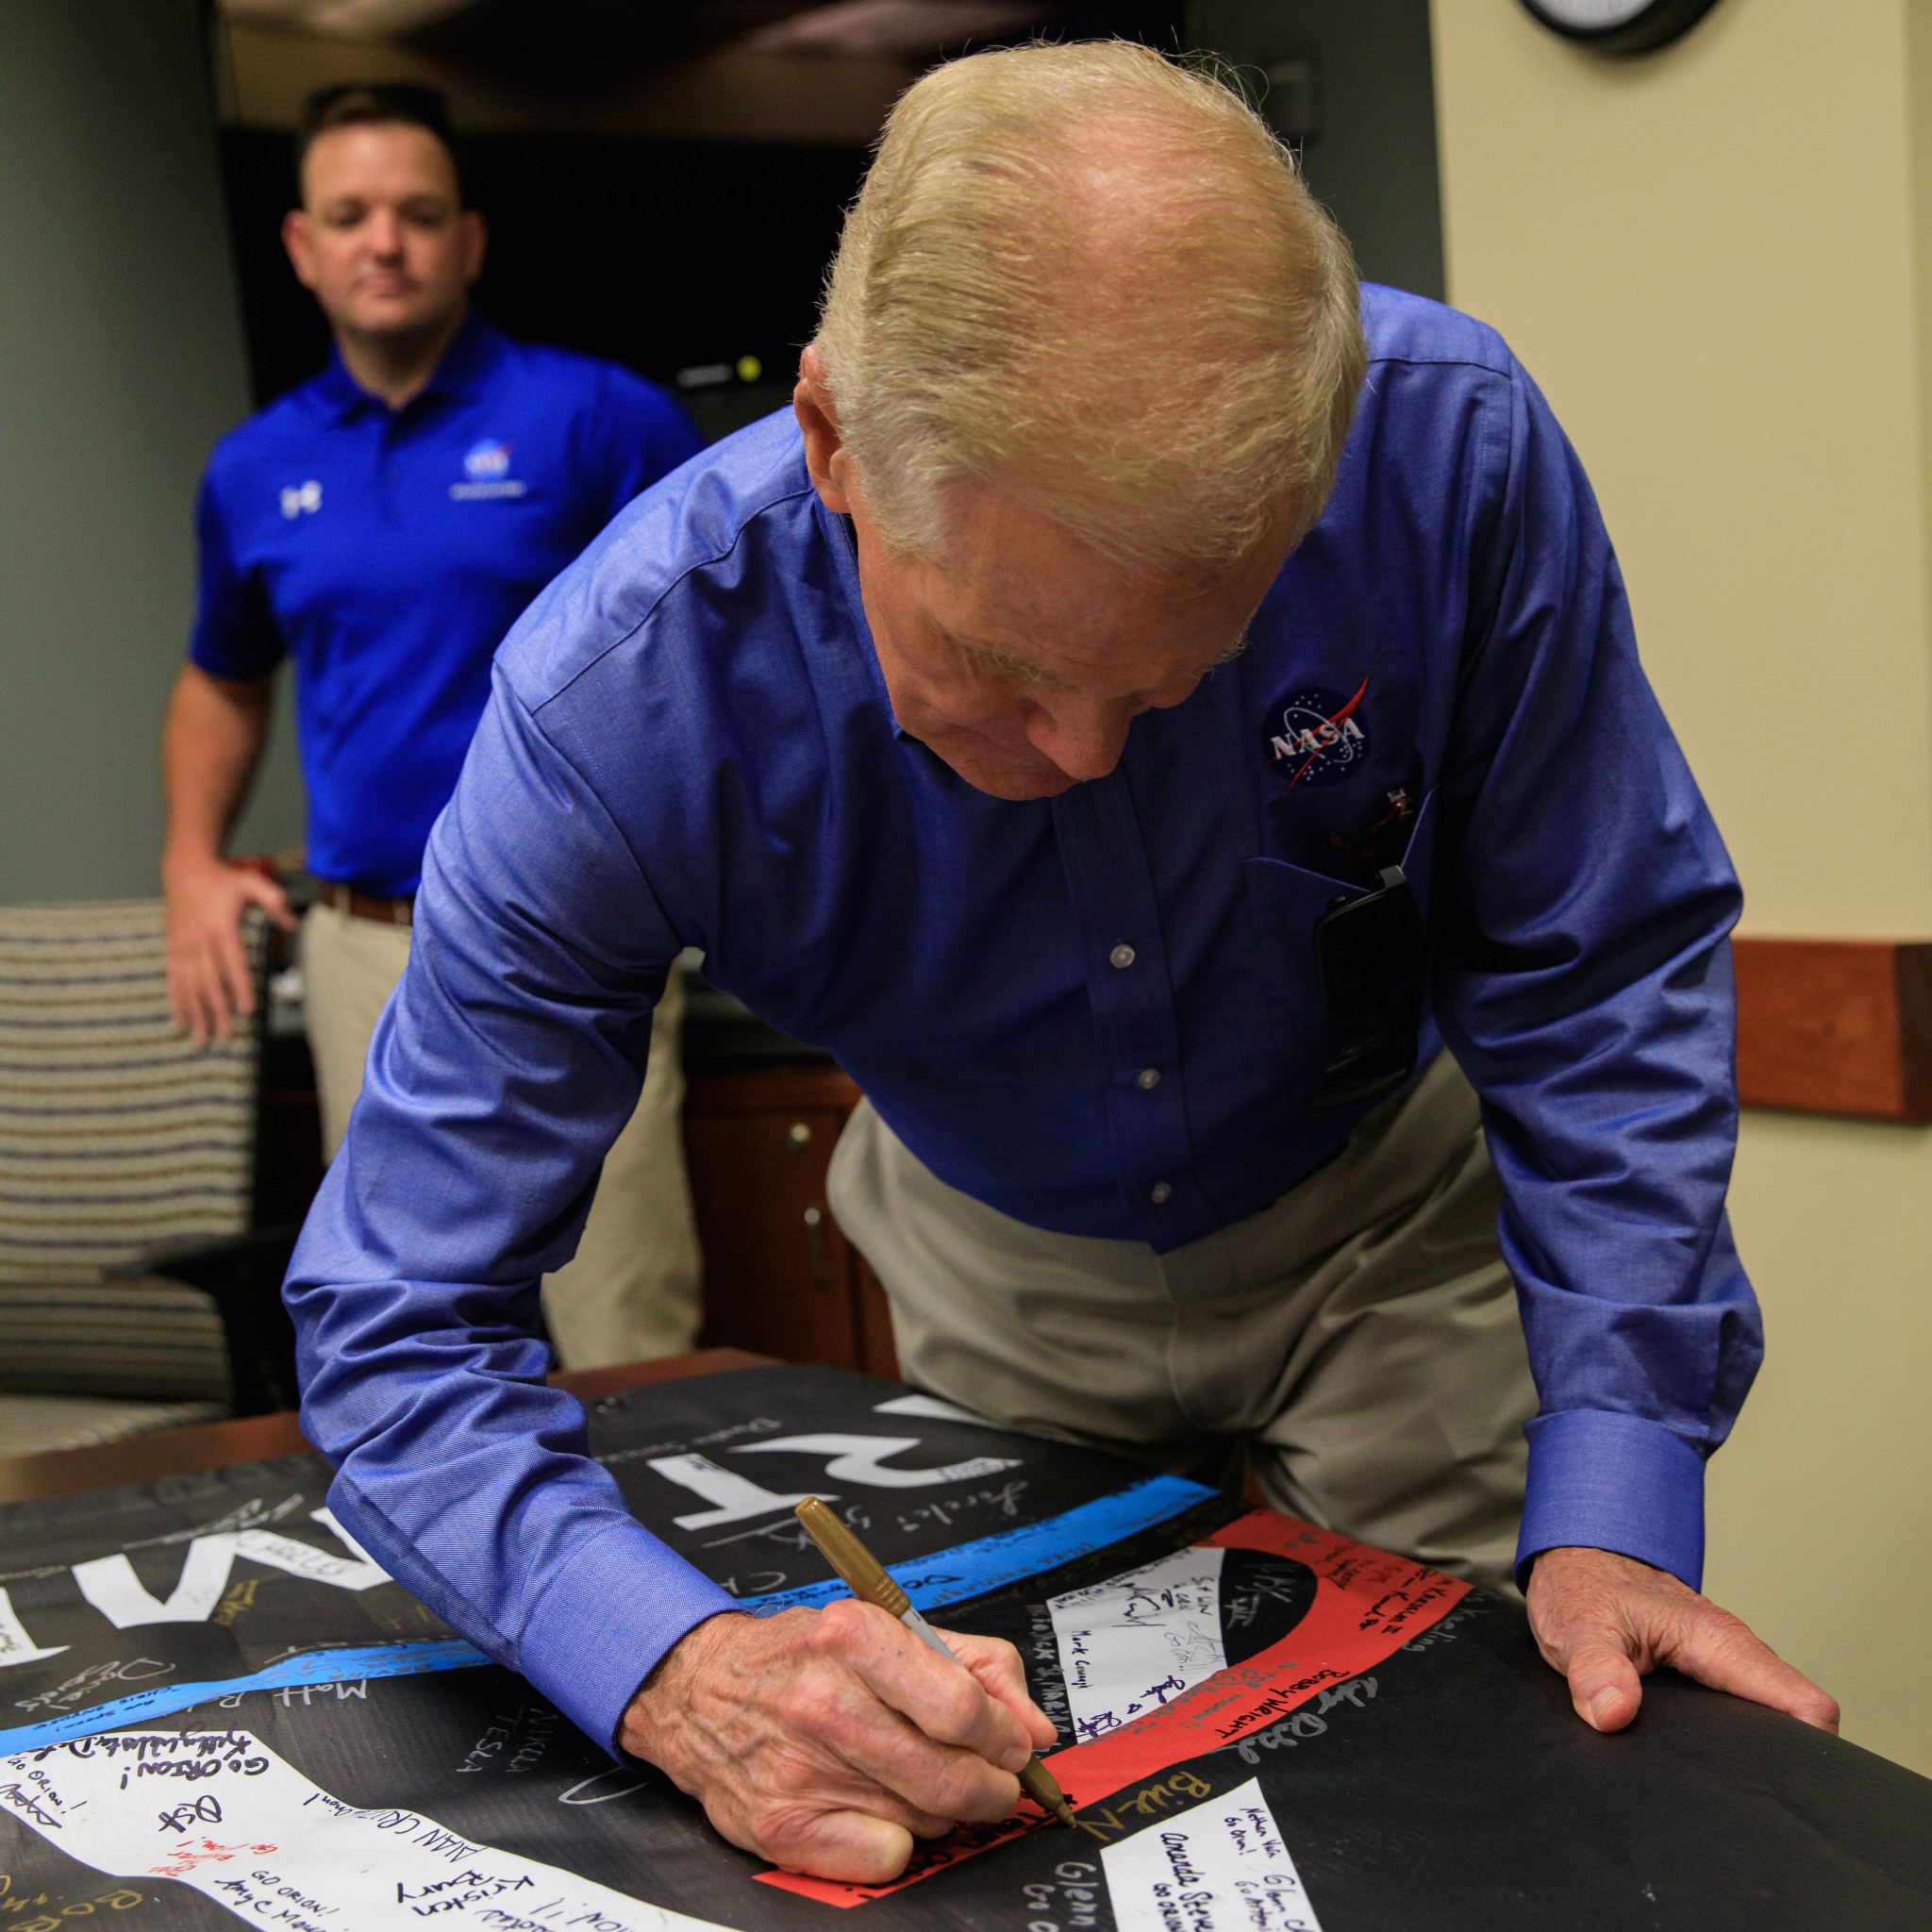 NASA Administrator Bill Nelson adds his signature to an Artemis banner inside the Neil Armstrong Operations and Checkout (O&C) Building during a visit to the agency’s Kennedy Space Center in Florida on July 27, 2021. While at the O&C, Nelson had the opportunity to view some of the flight hardware for Artemis II – the first test flight of the Space Launch System rocket and Orion spacecraft with crew on board.